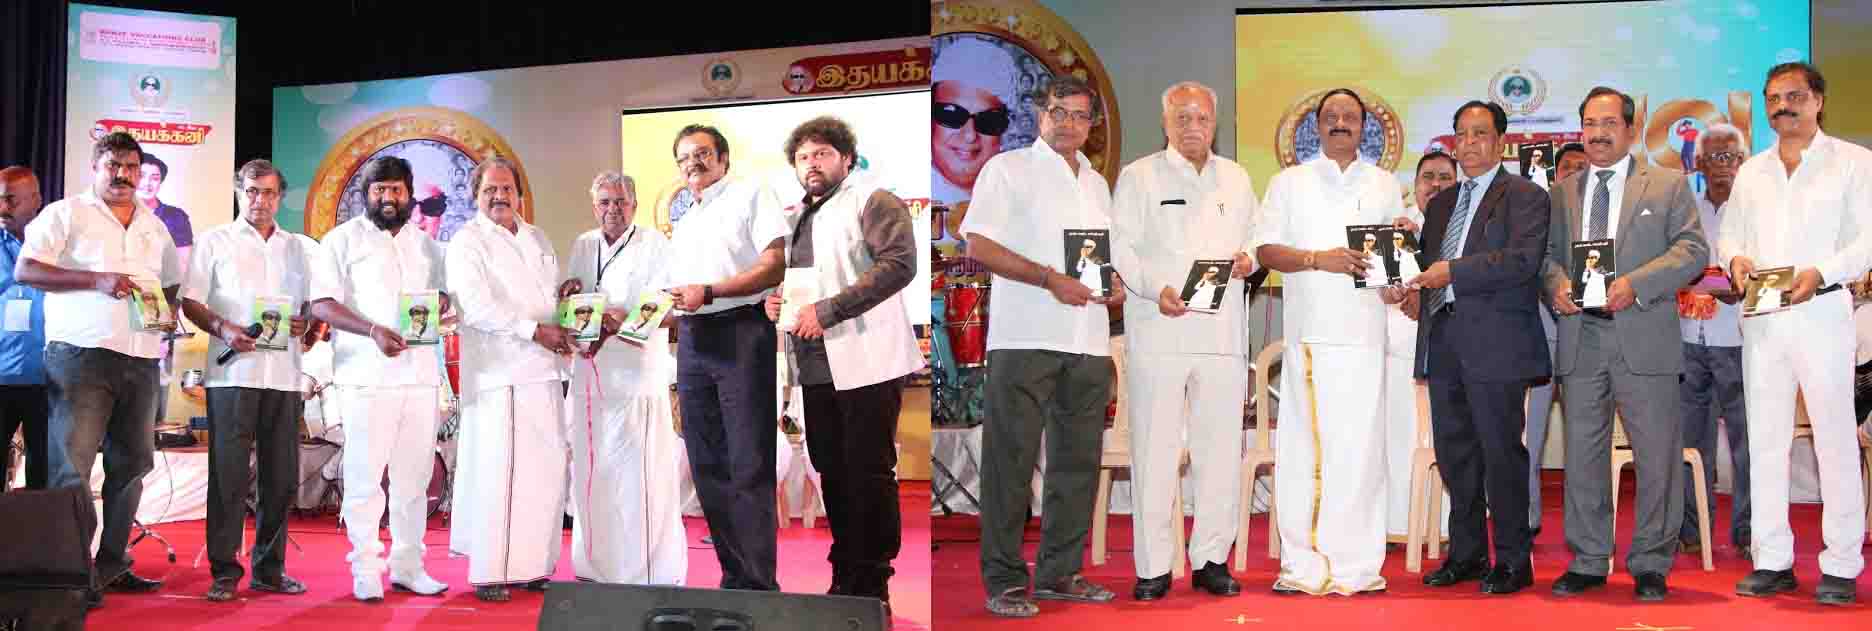 mgr book launch